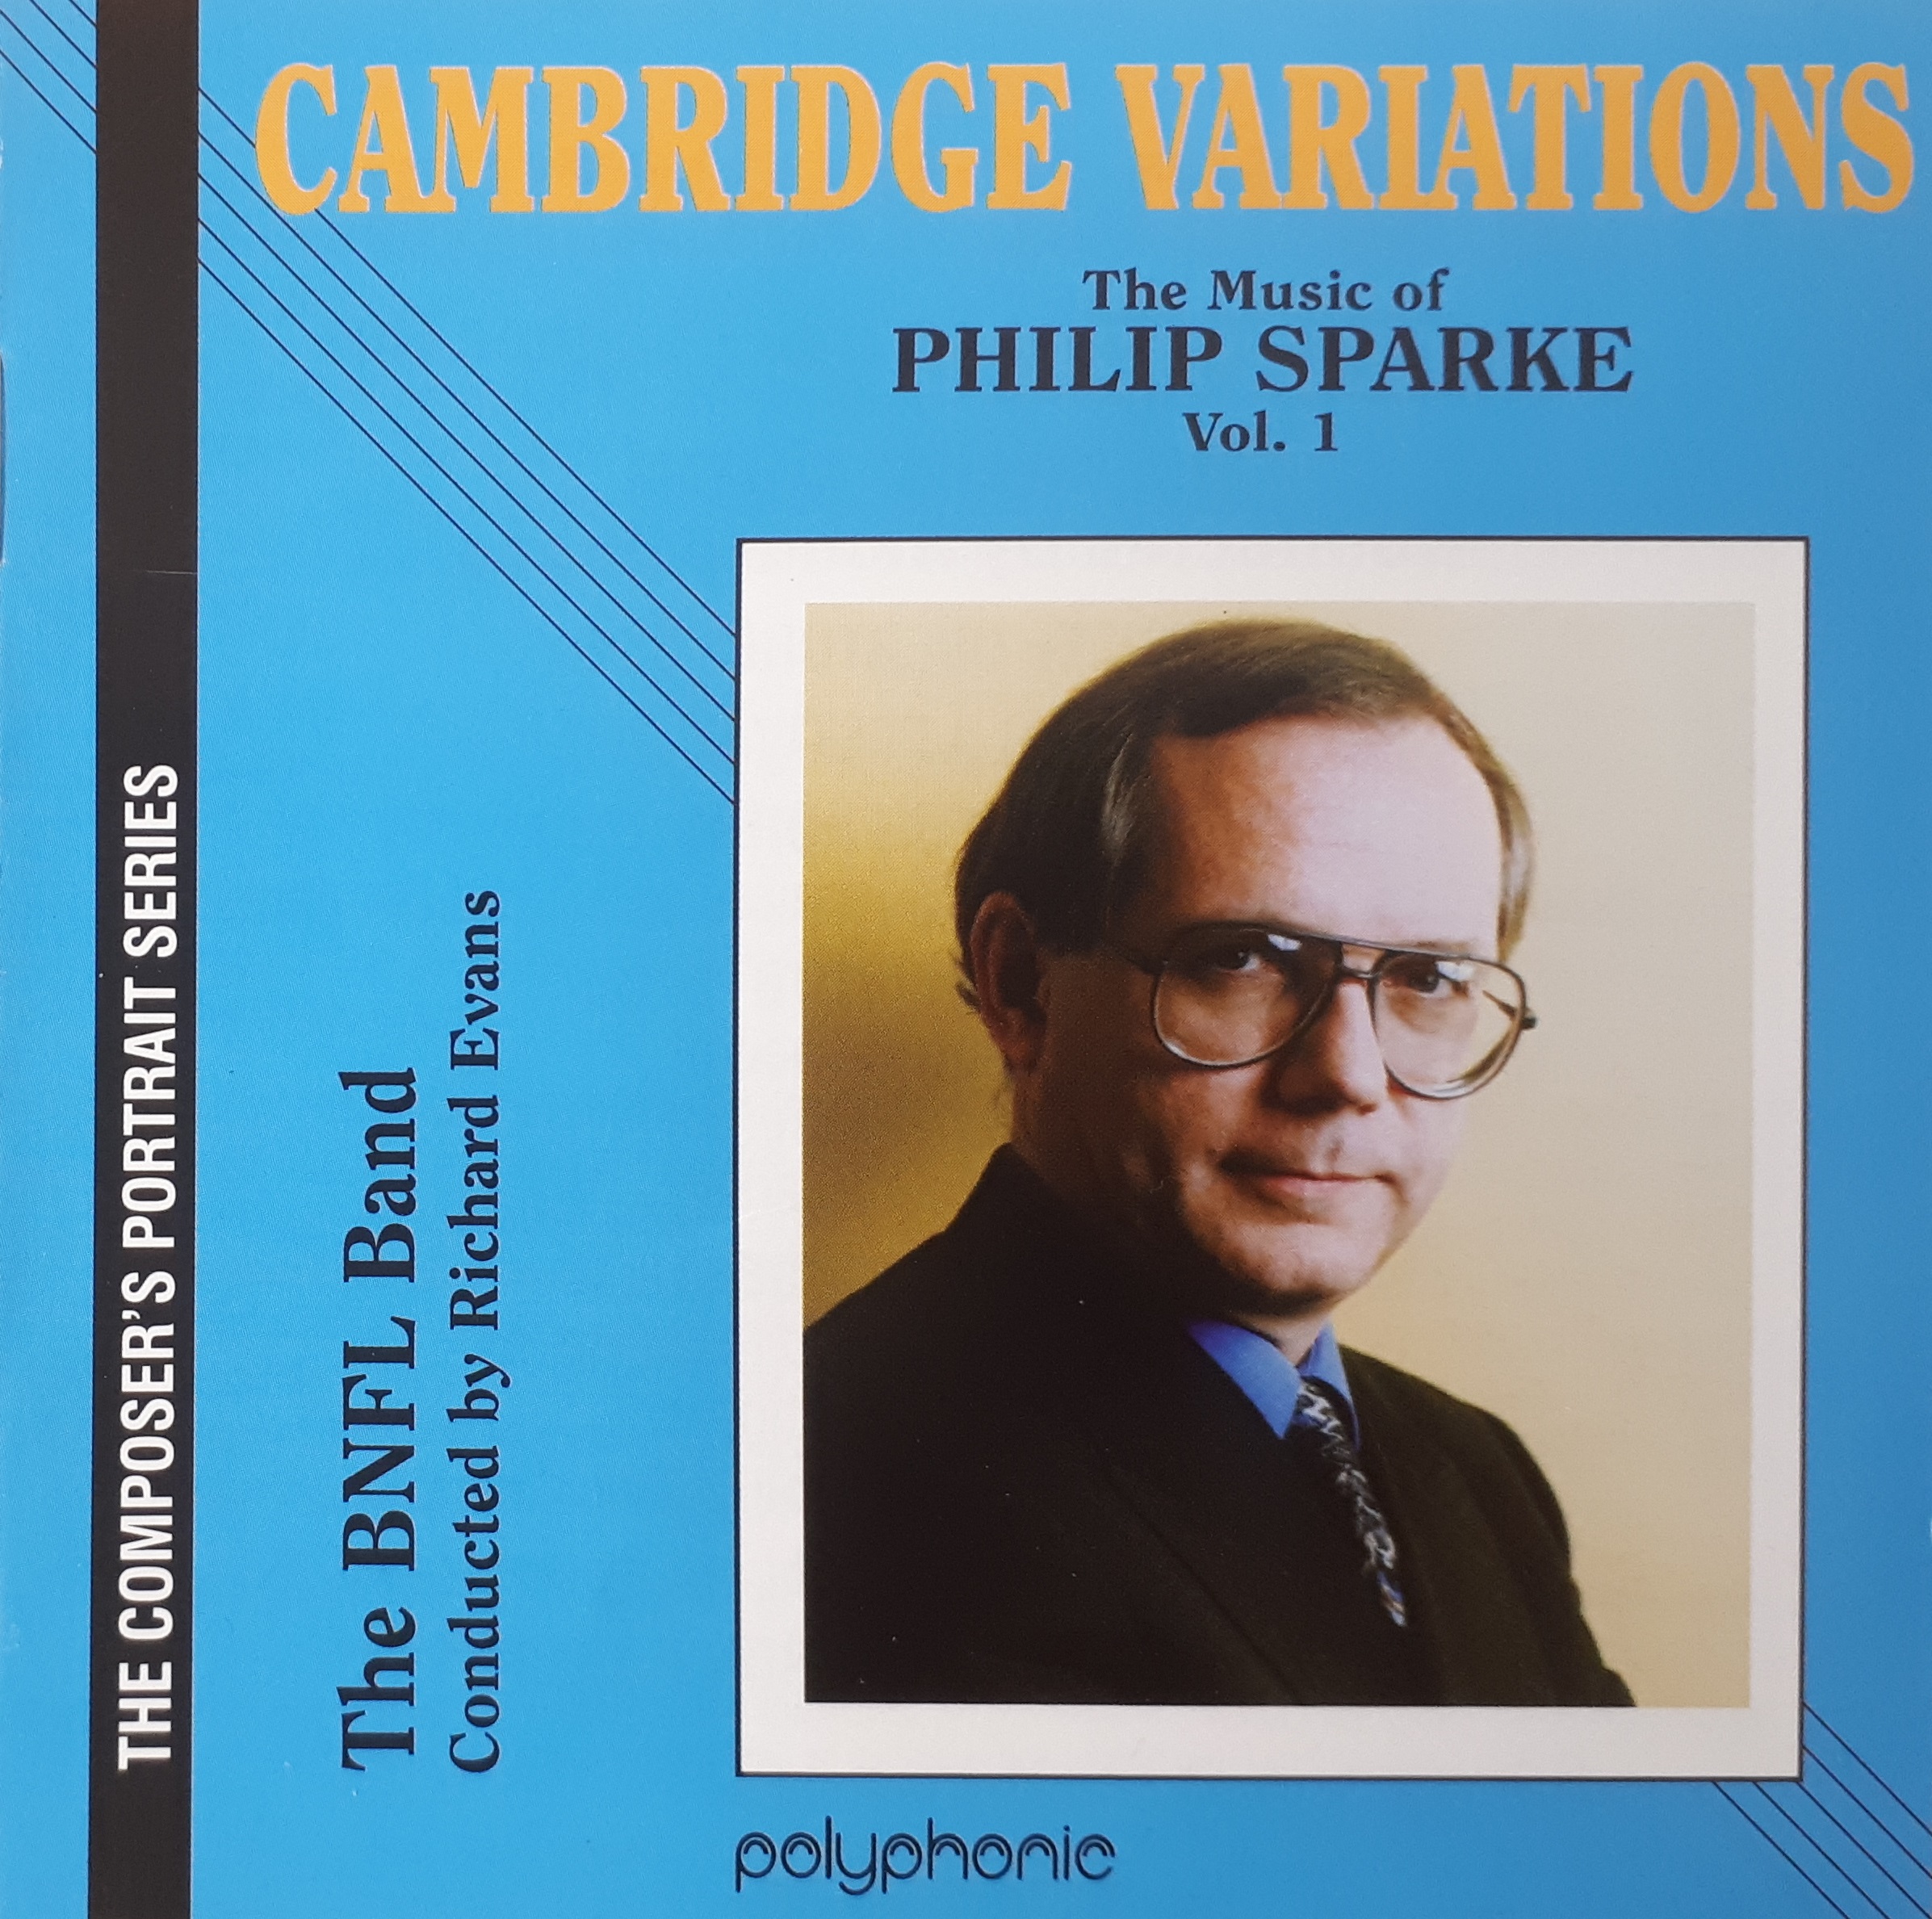 Cambridge Variations - The Music of Philip Sparke Vol. 1 - CD